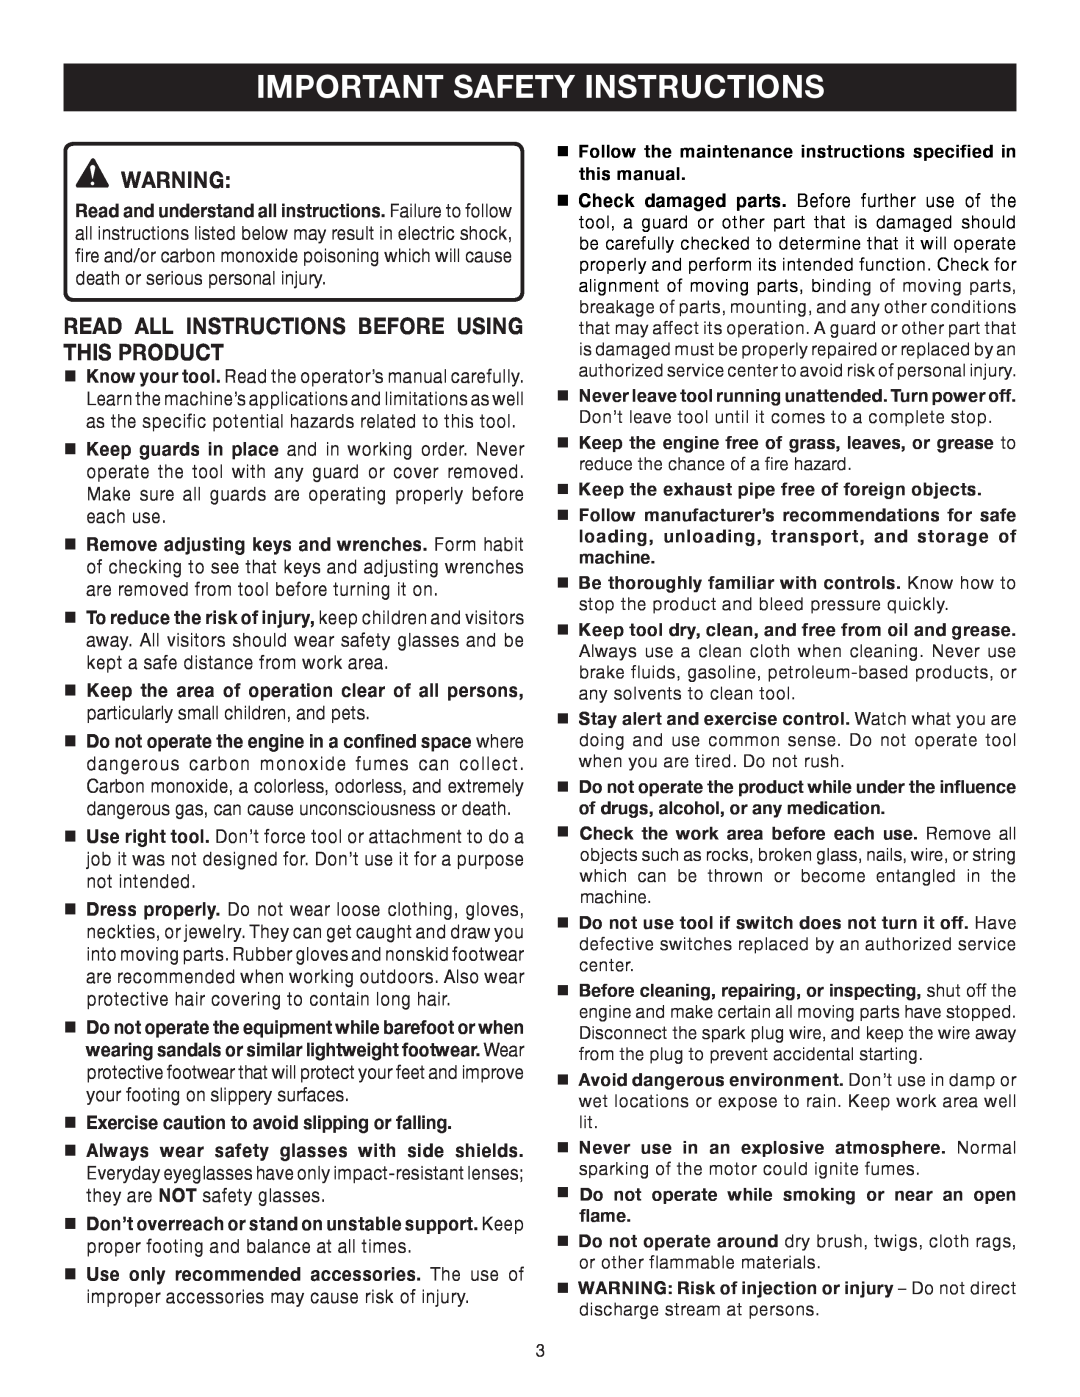 Briggs & Stratton HU80530, HU80931 manual Important Safety Instructions, Read All Instructions Before Using This Product 